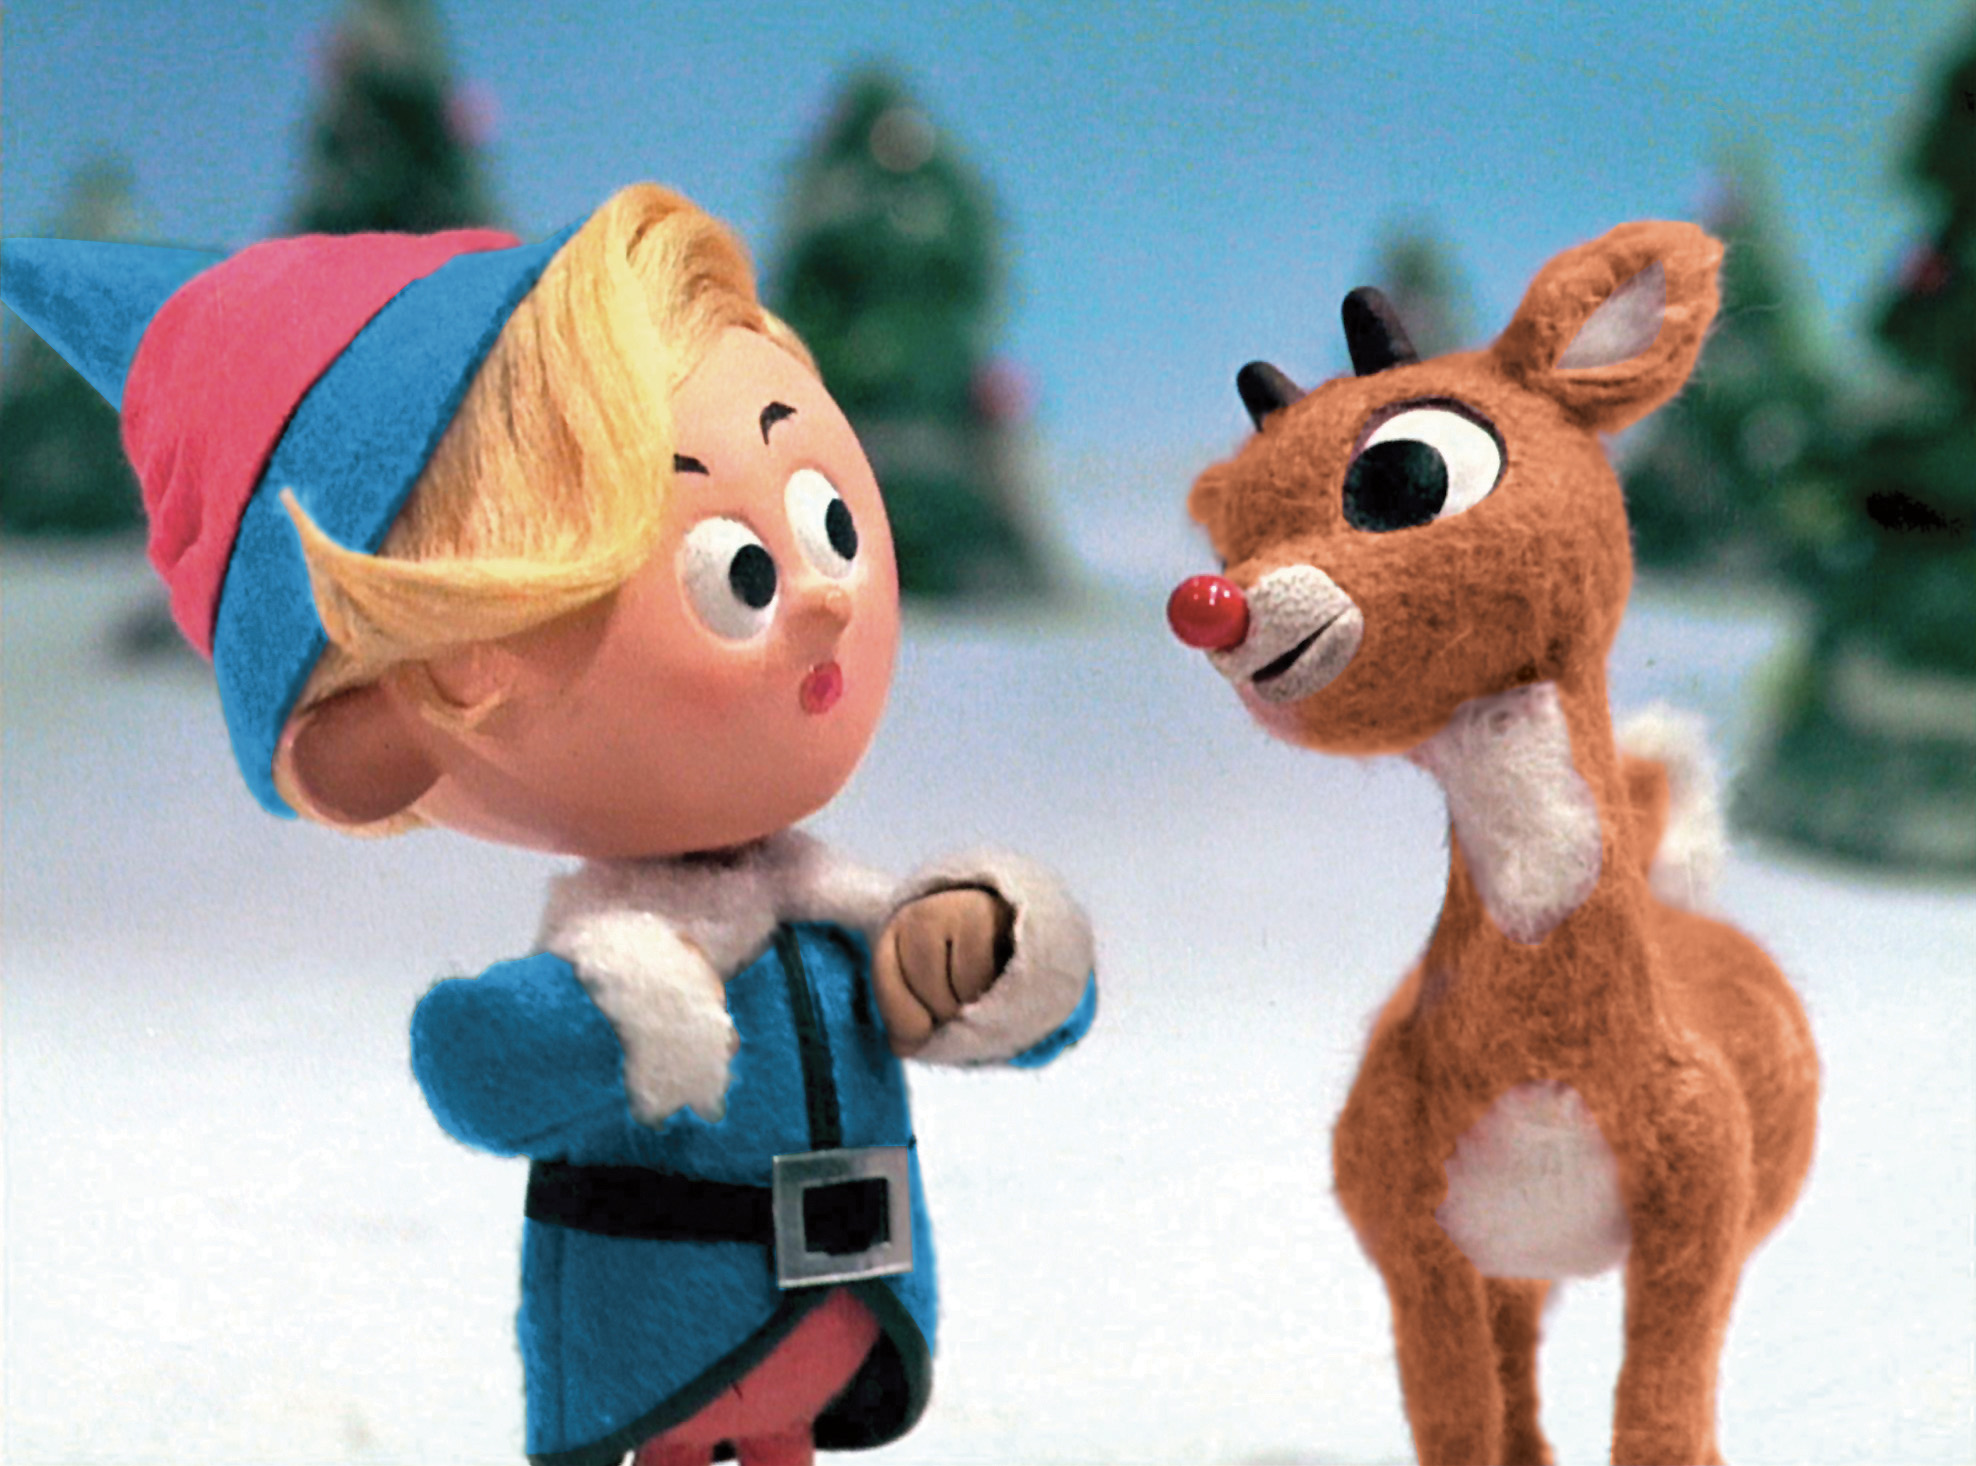 Rudolph the Red-nosed Reindeer and his friend